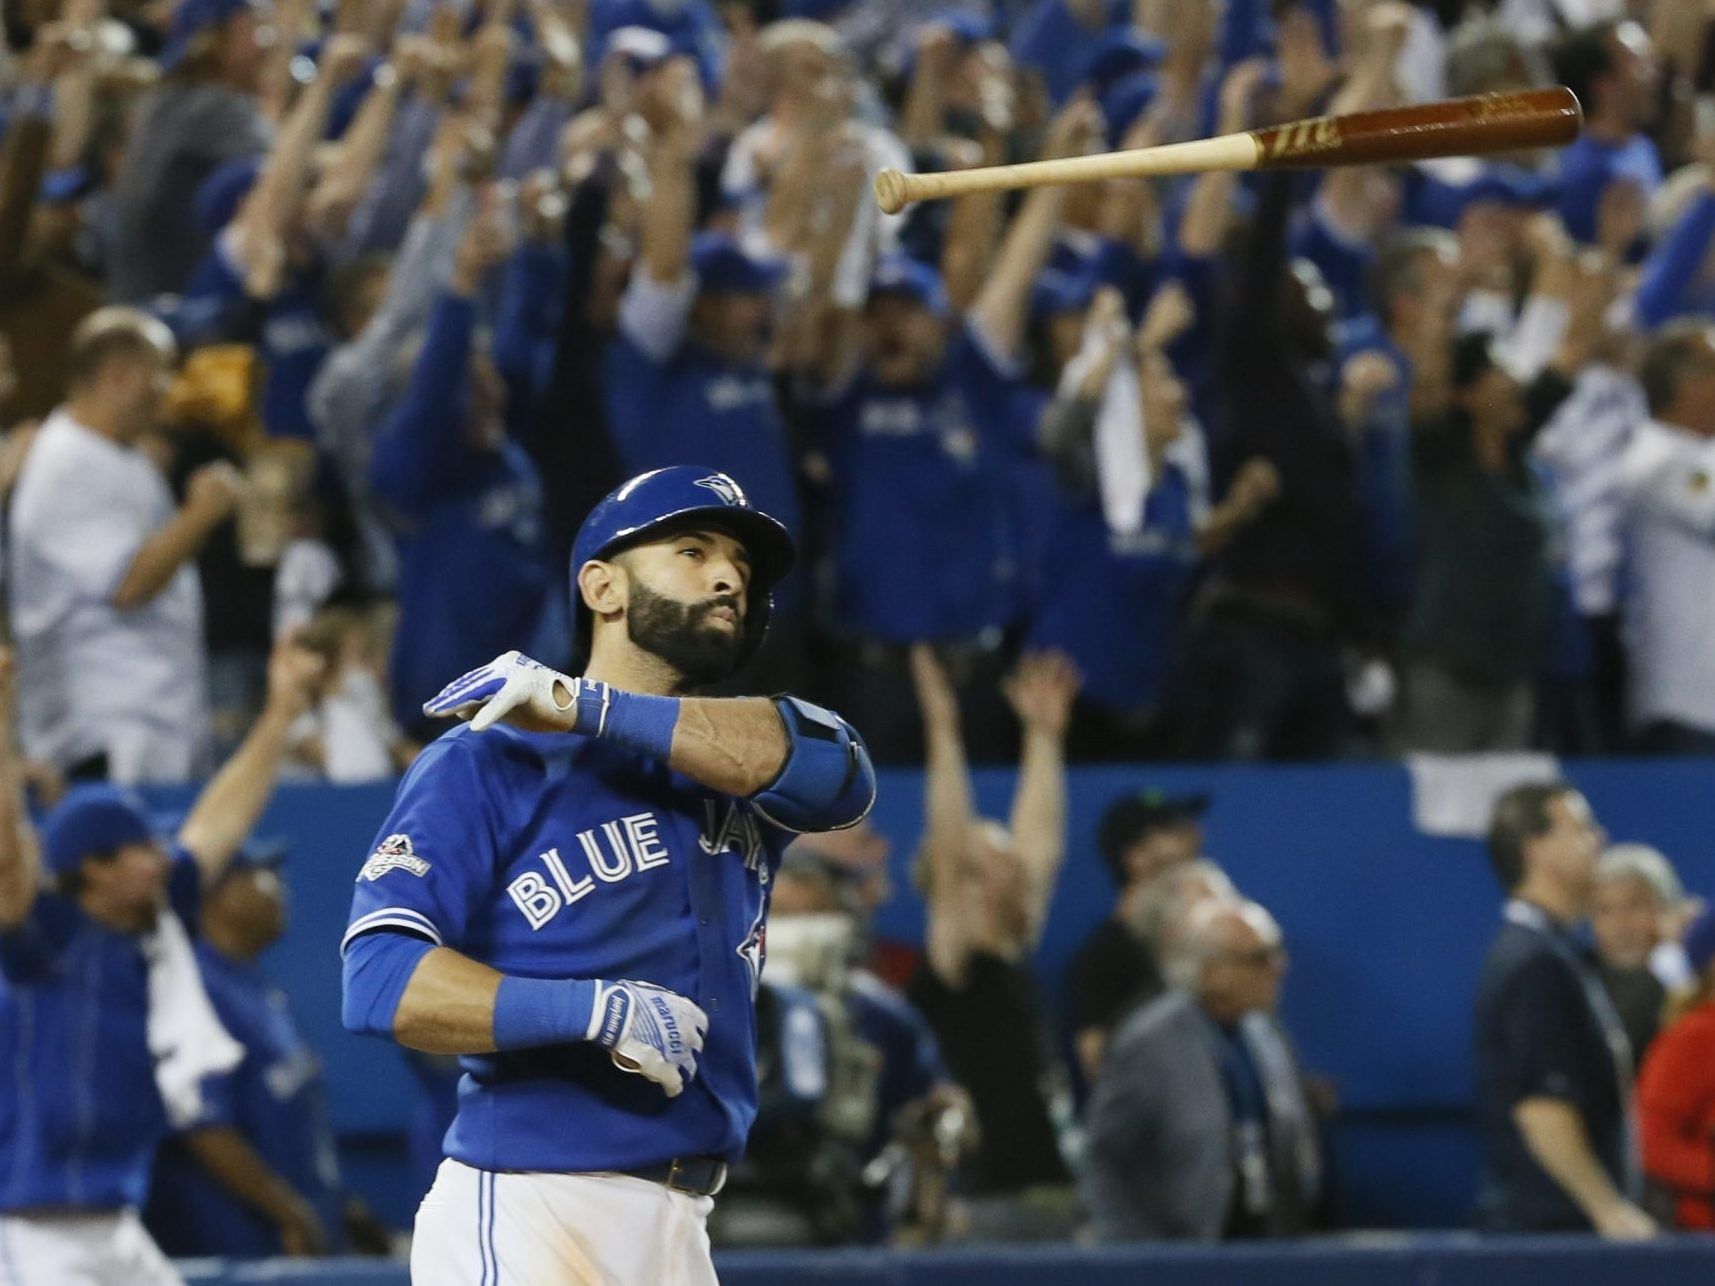 The Toronto Blue Jays' Jose Bautista rounds the bases after